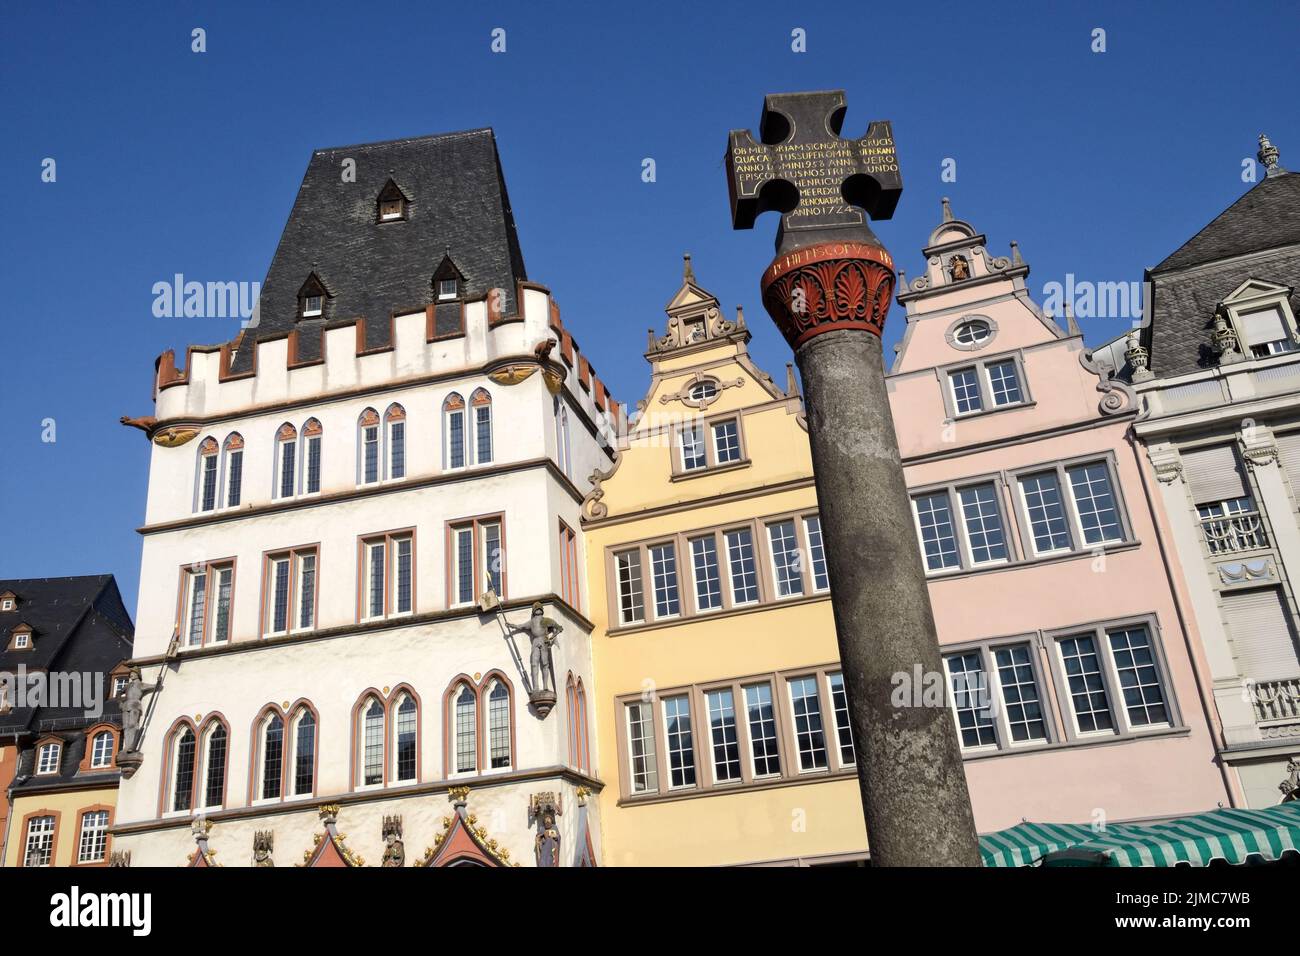 Trier - Market cross in front of historic row of houses, Germany Stock Photo